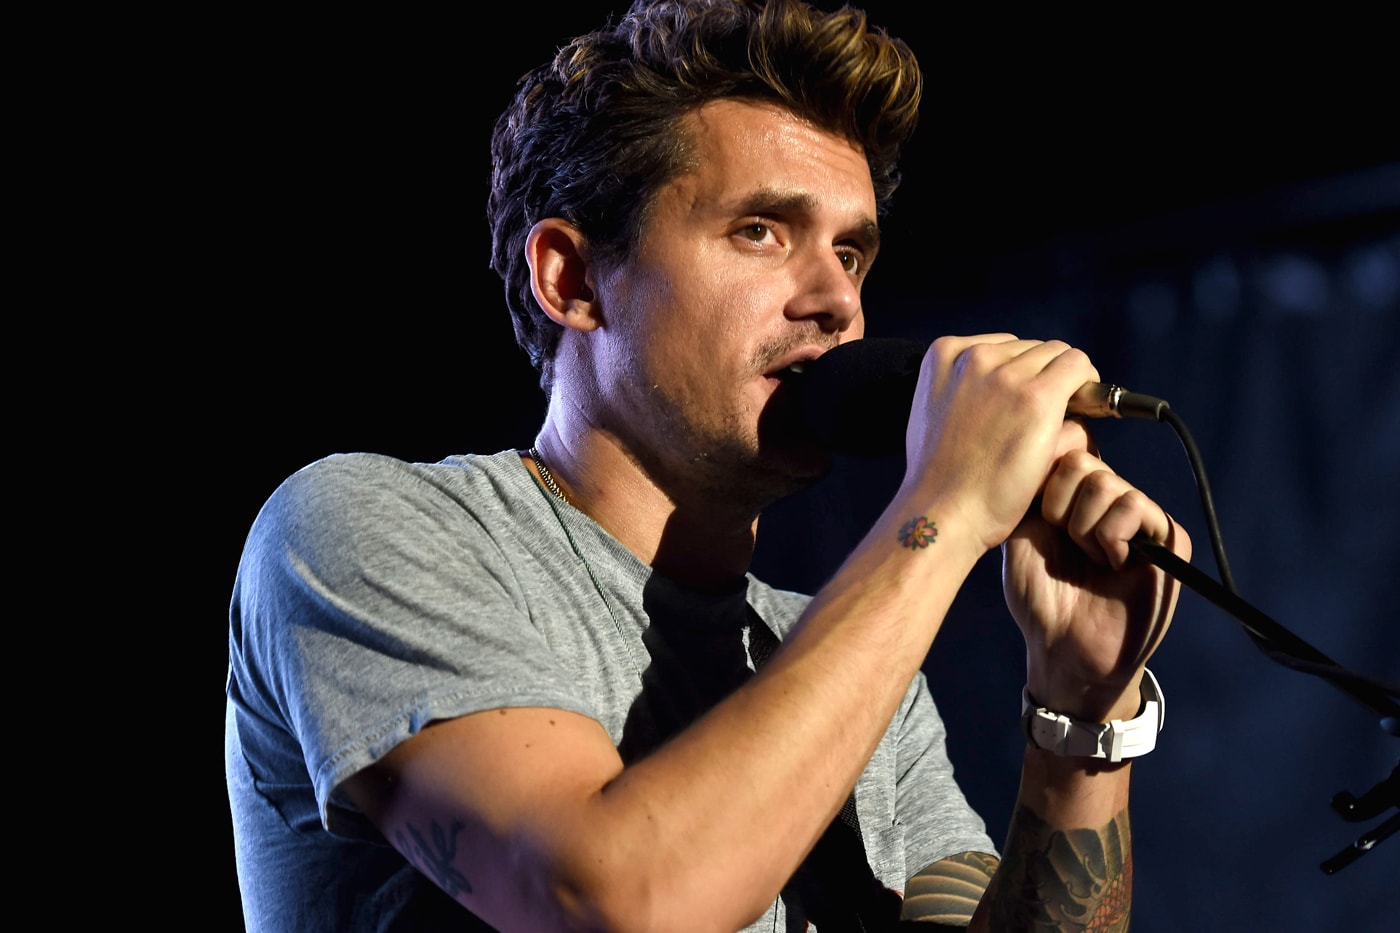 John Mayer "Wave One" 'The Search for Everything'